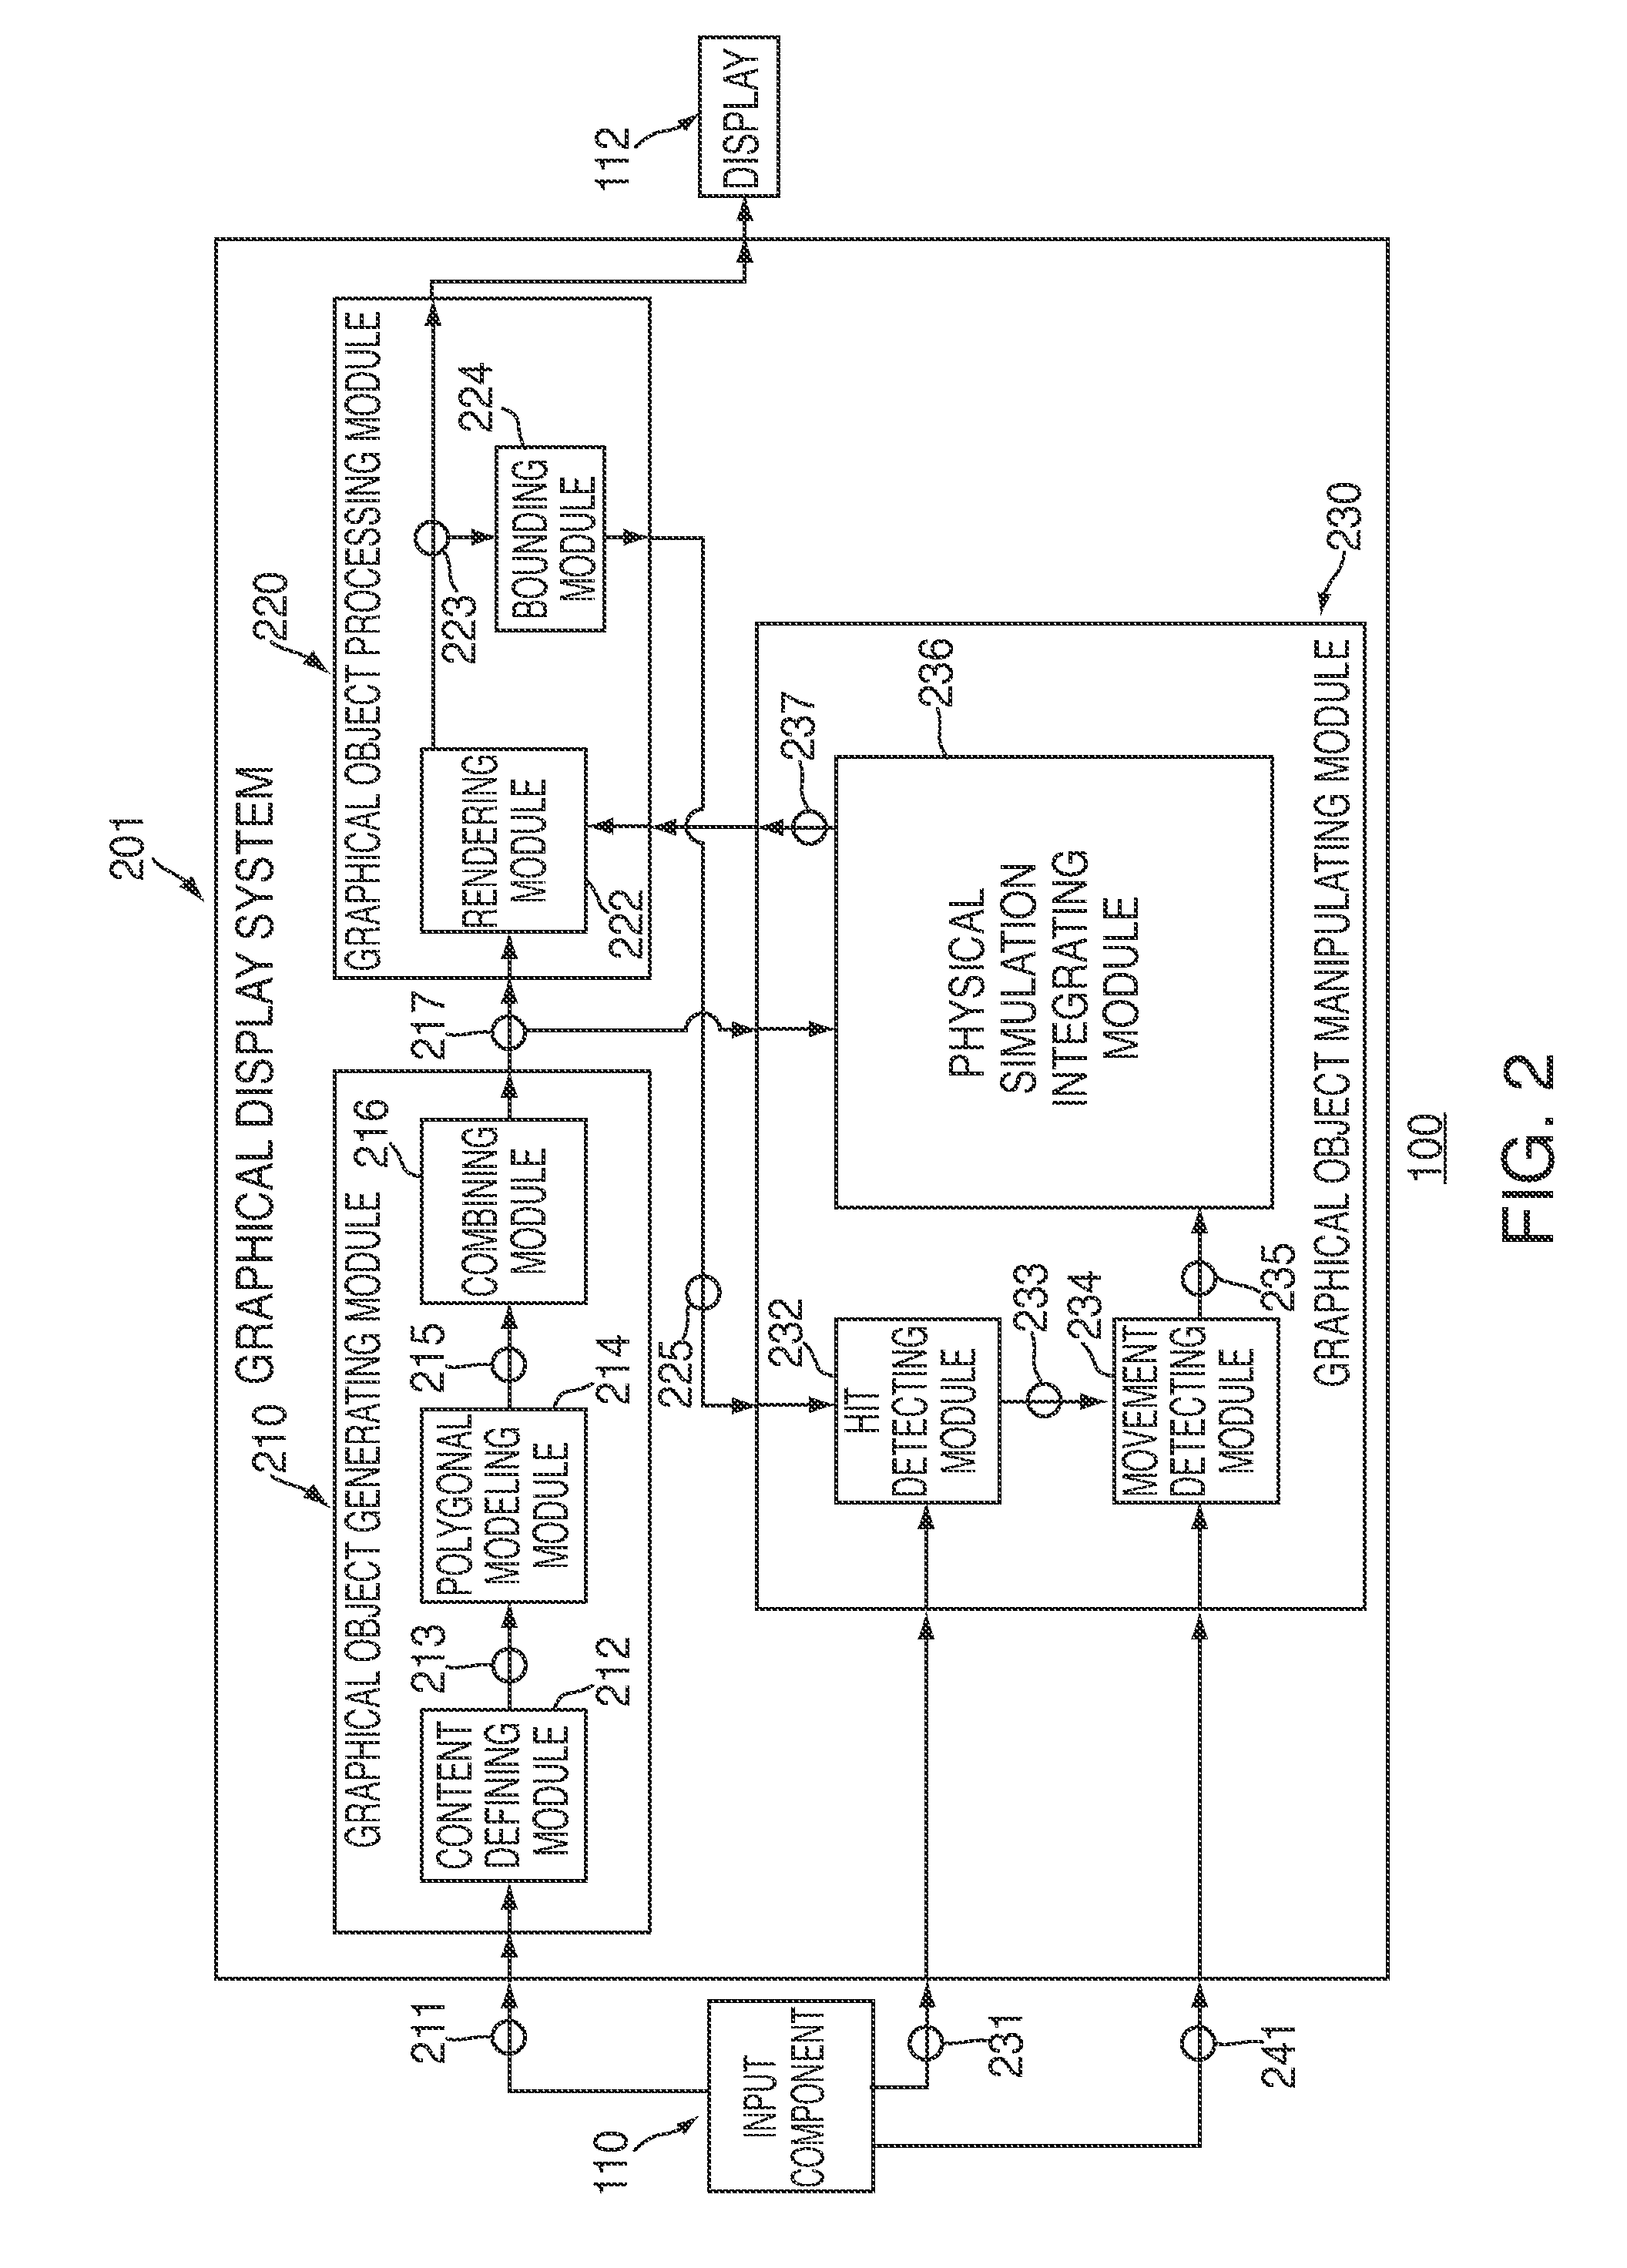 Systems, methods, and computer-readable media for manipulating graphical objects